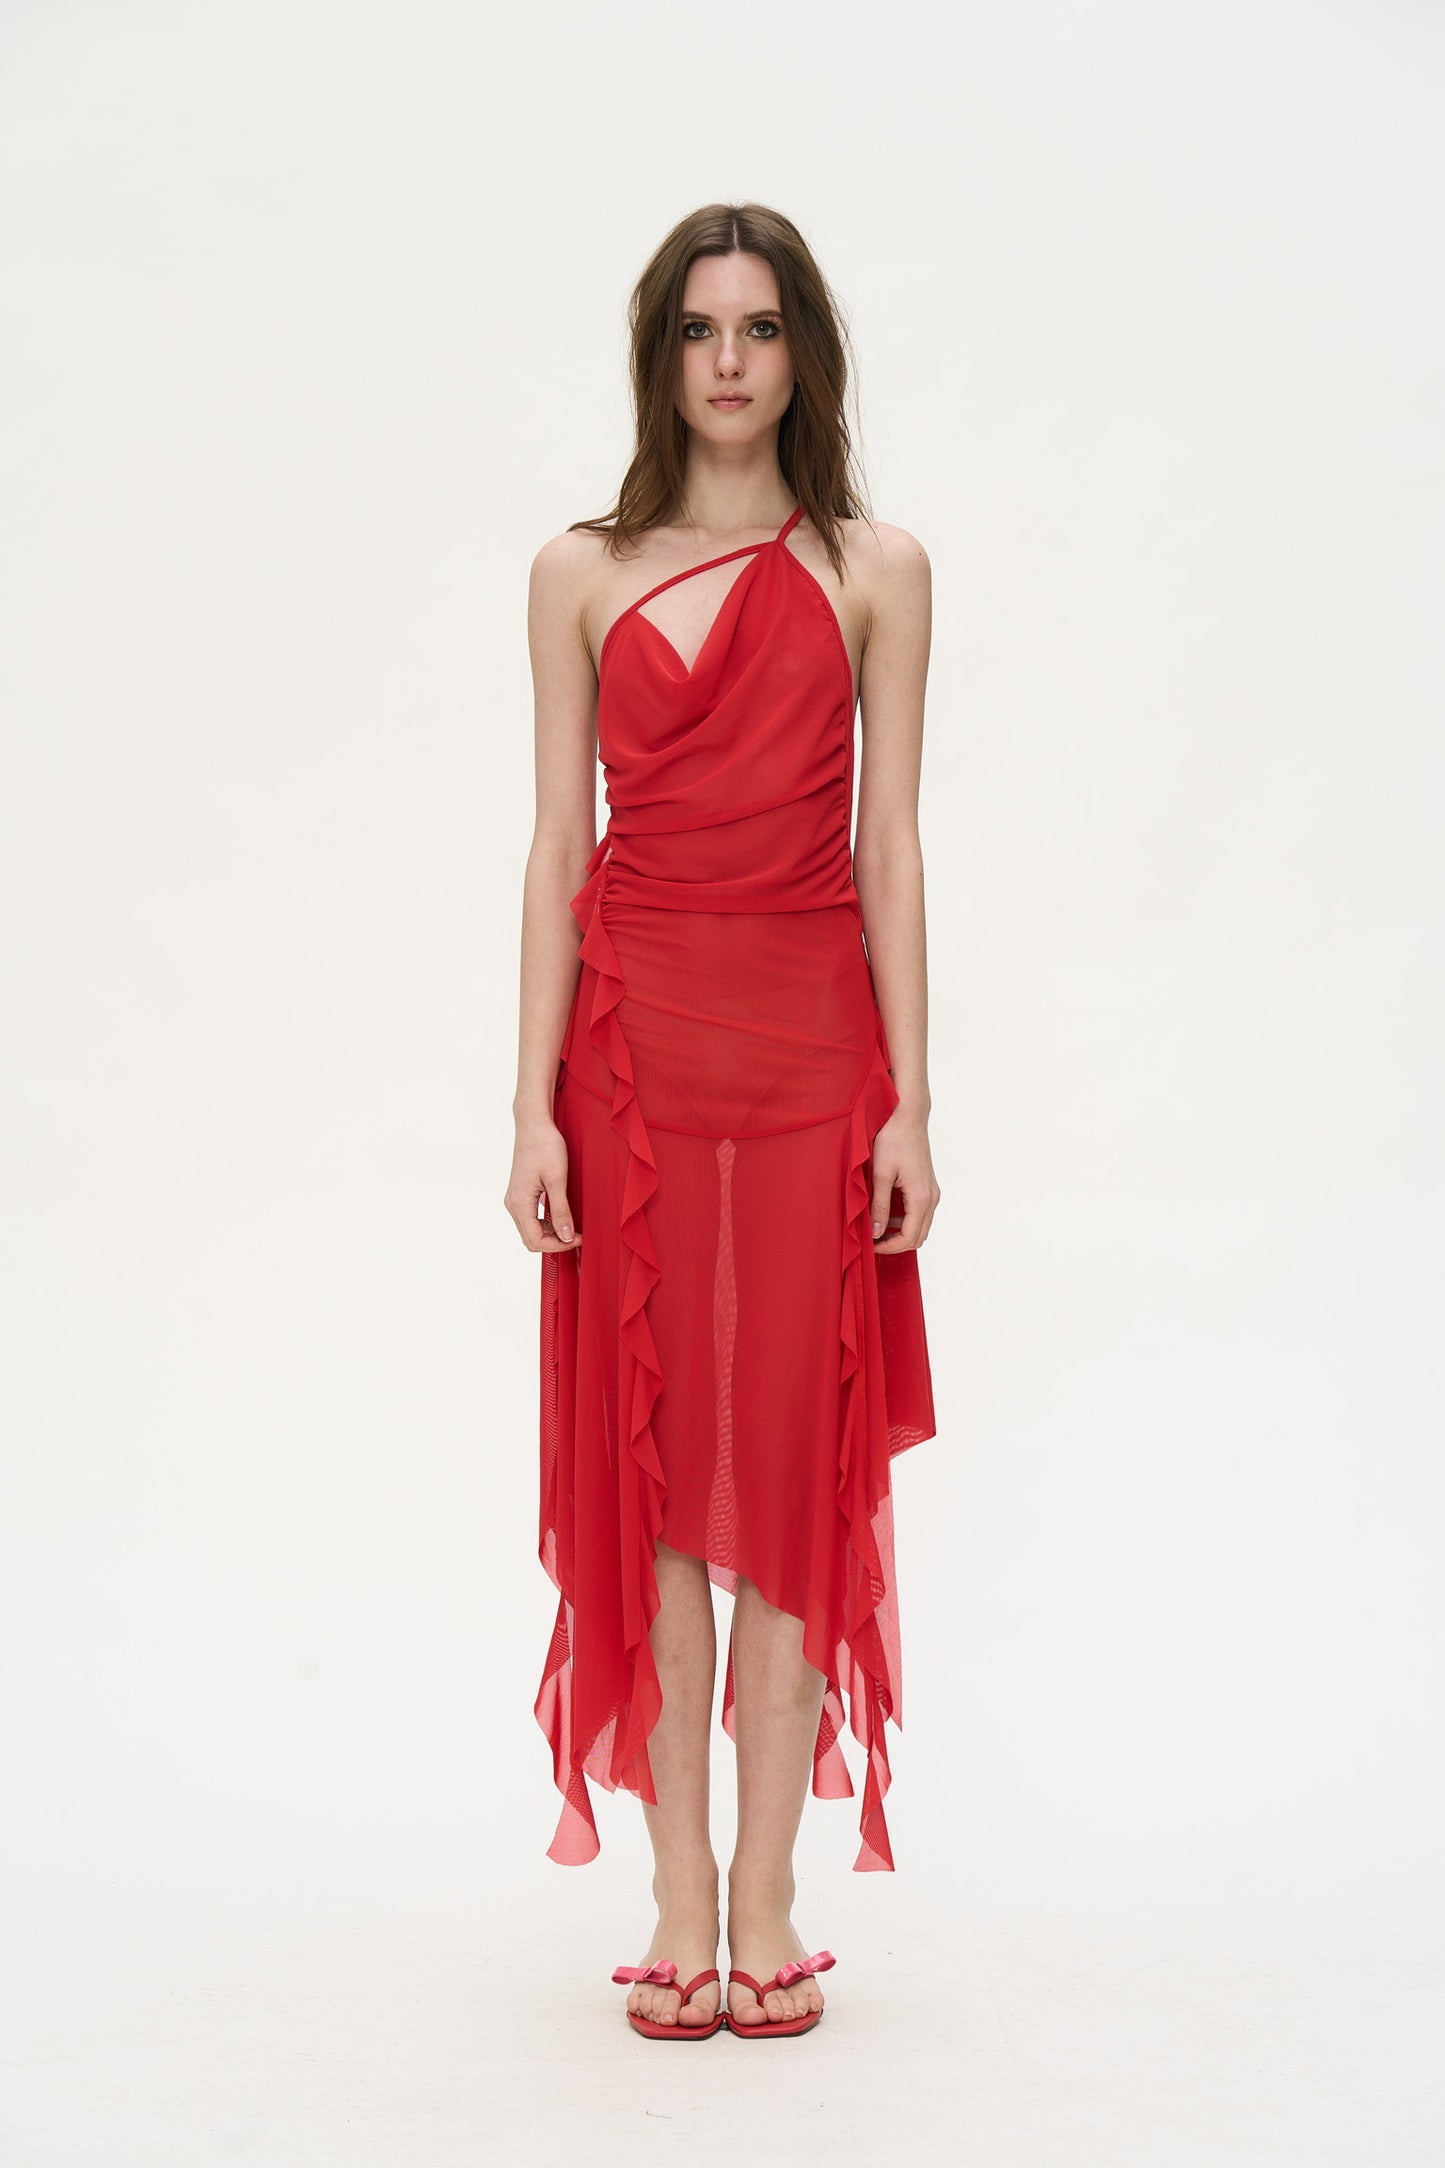 Laurence Lace Chiffon Dress in Red